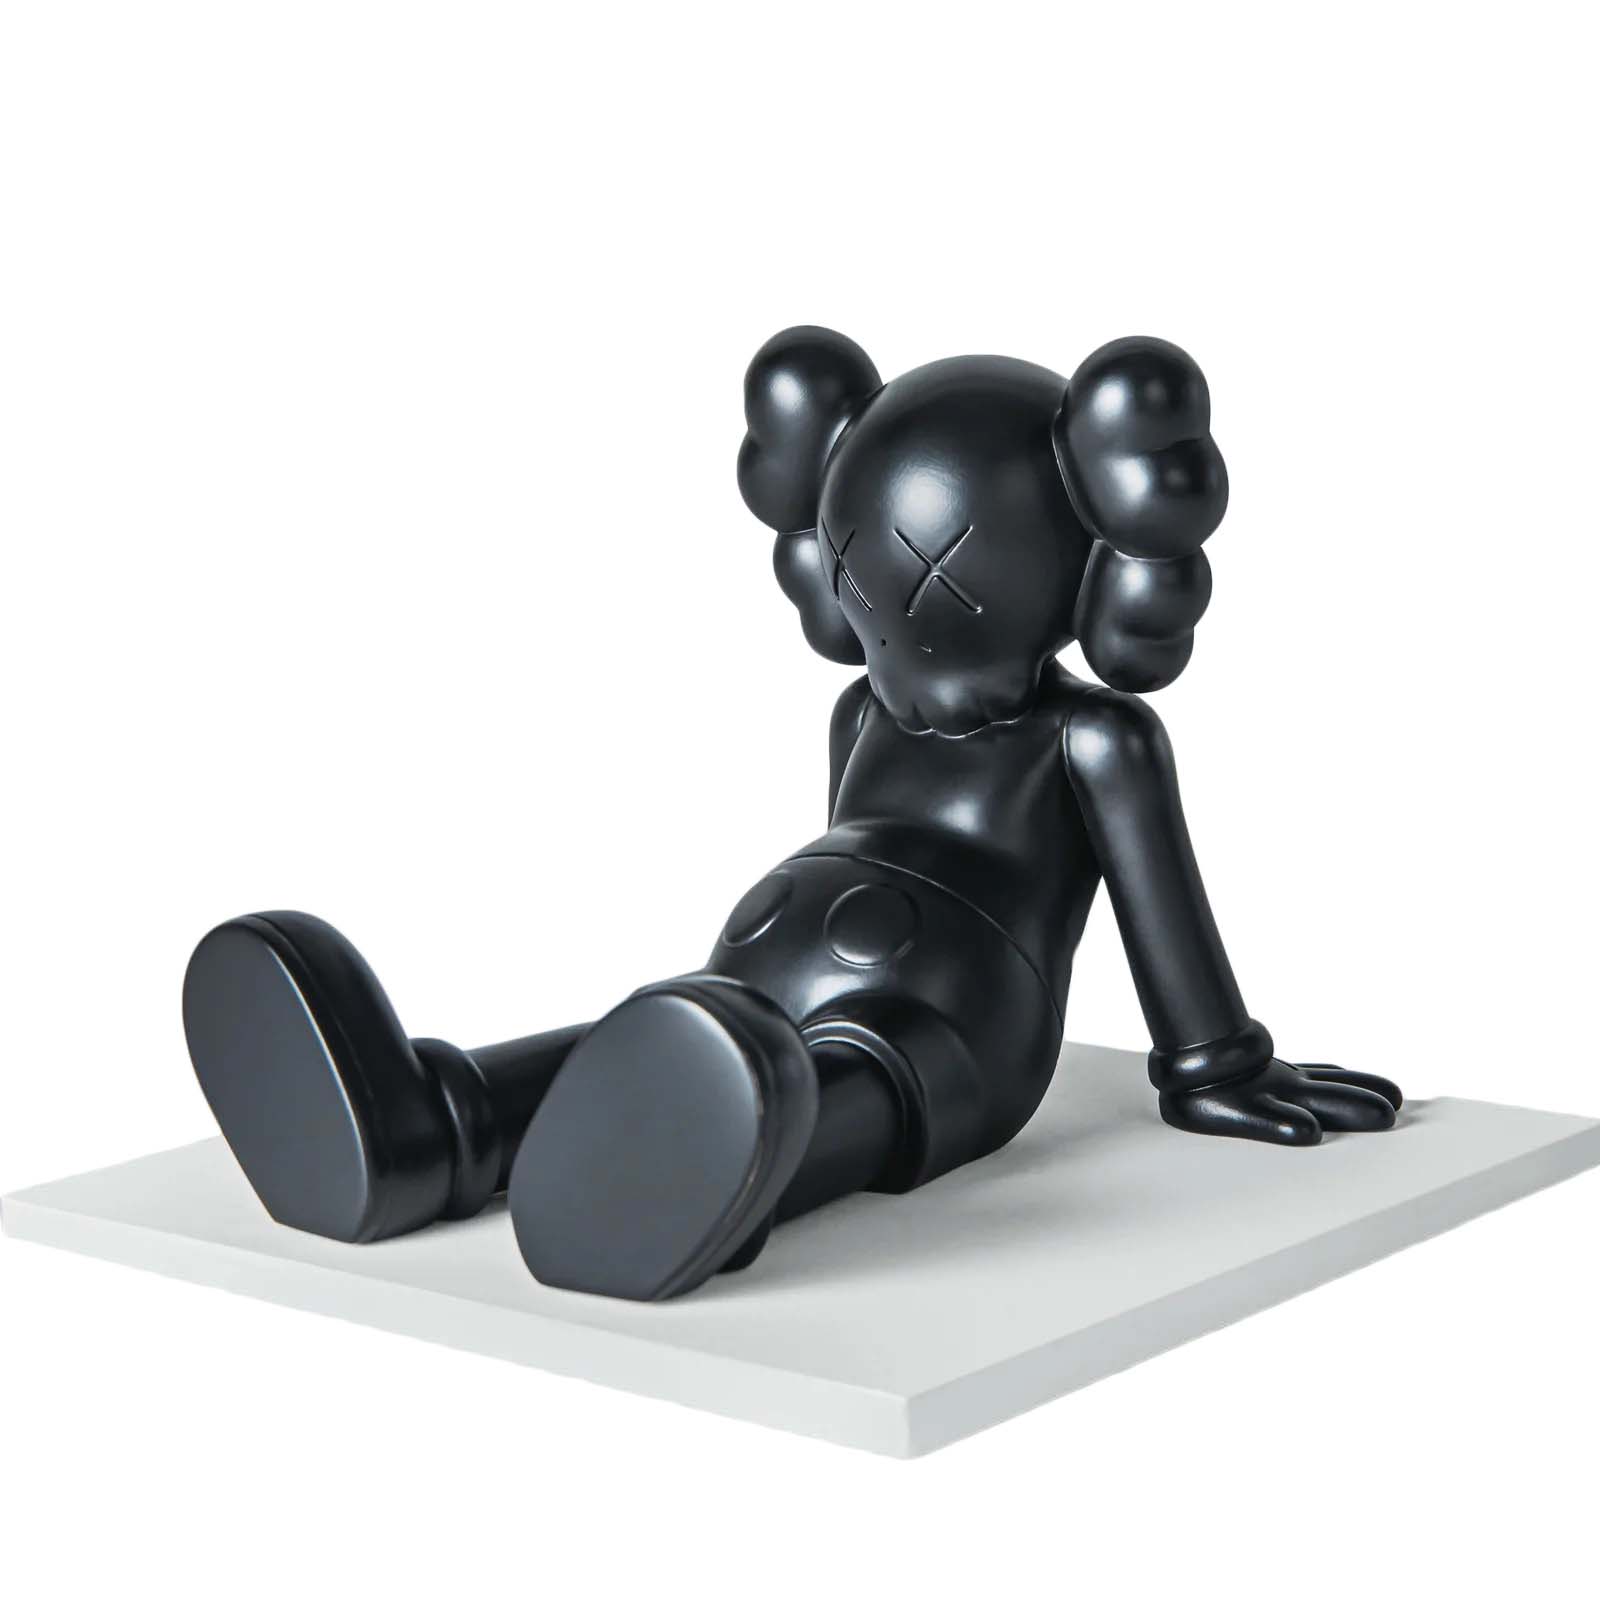 KAWS Still Moment Bronze Figure (Edition of 250 + 50 AP, with Signed COA)